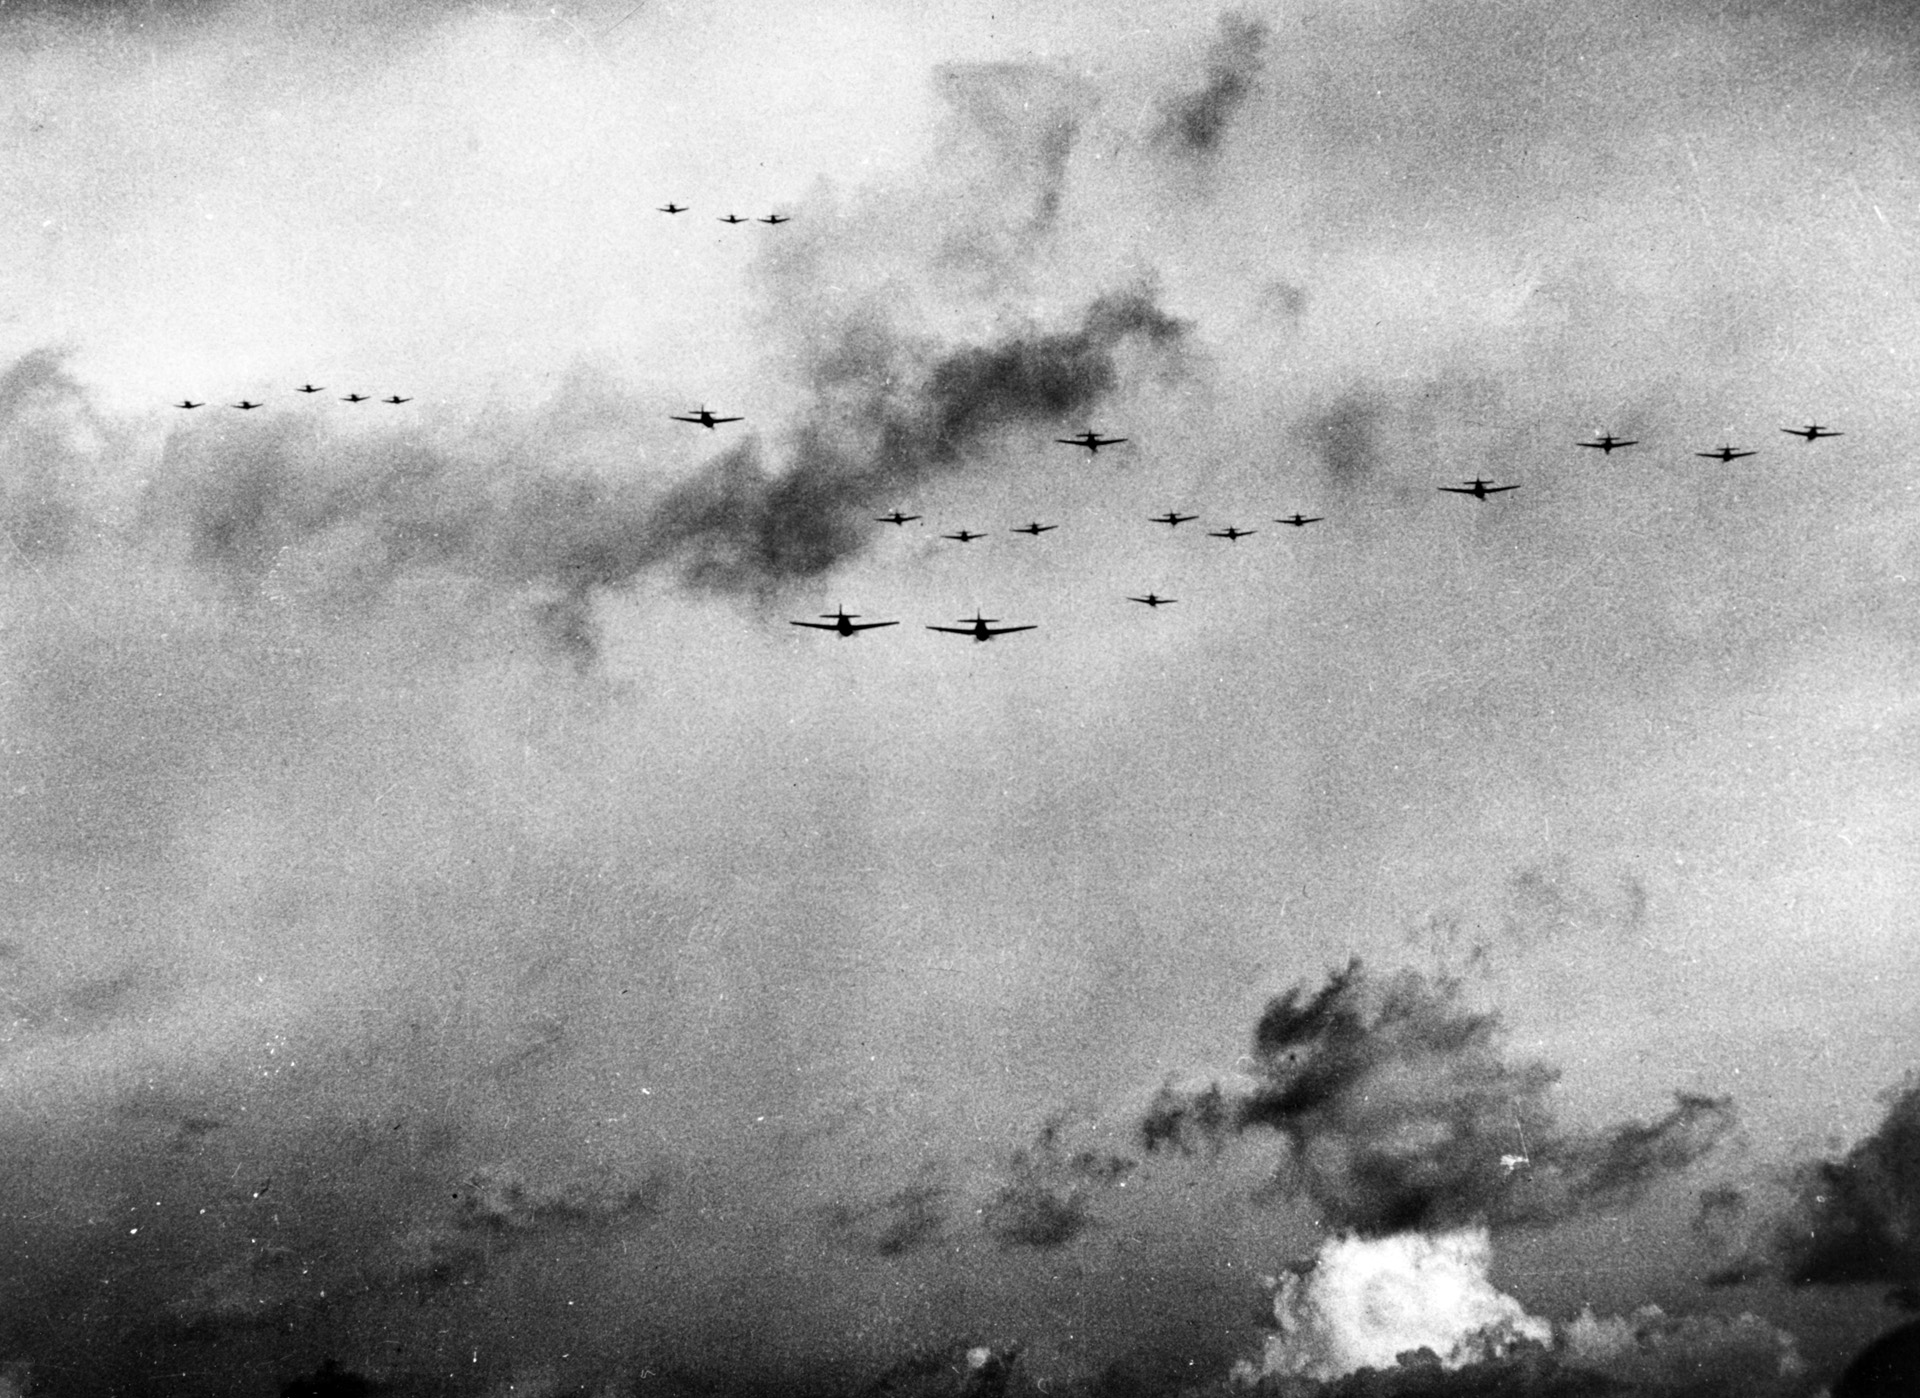 An impressive flight of 23 Grumman F6F Hellcat fighter planes launched by aircraft carriers of U.S. Task Force 58 assembles to ward off attacks against American ships during the battle.